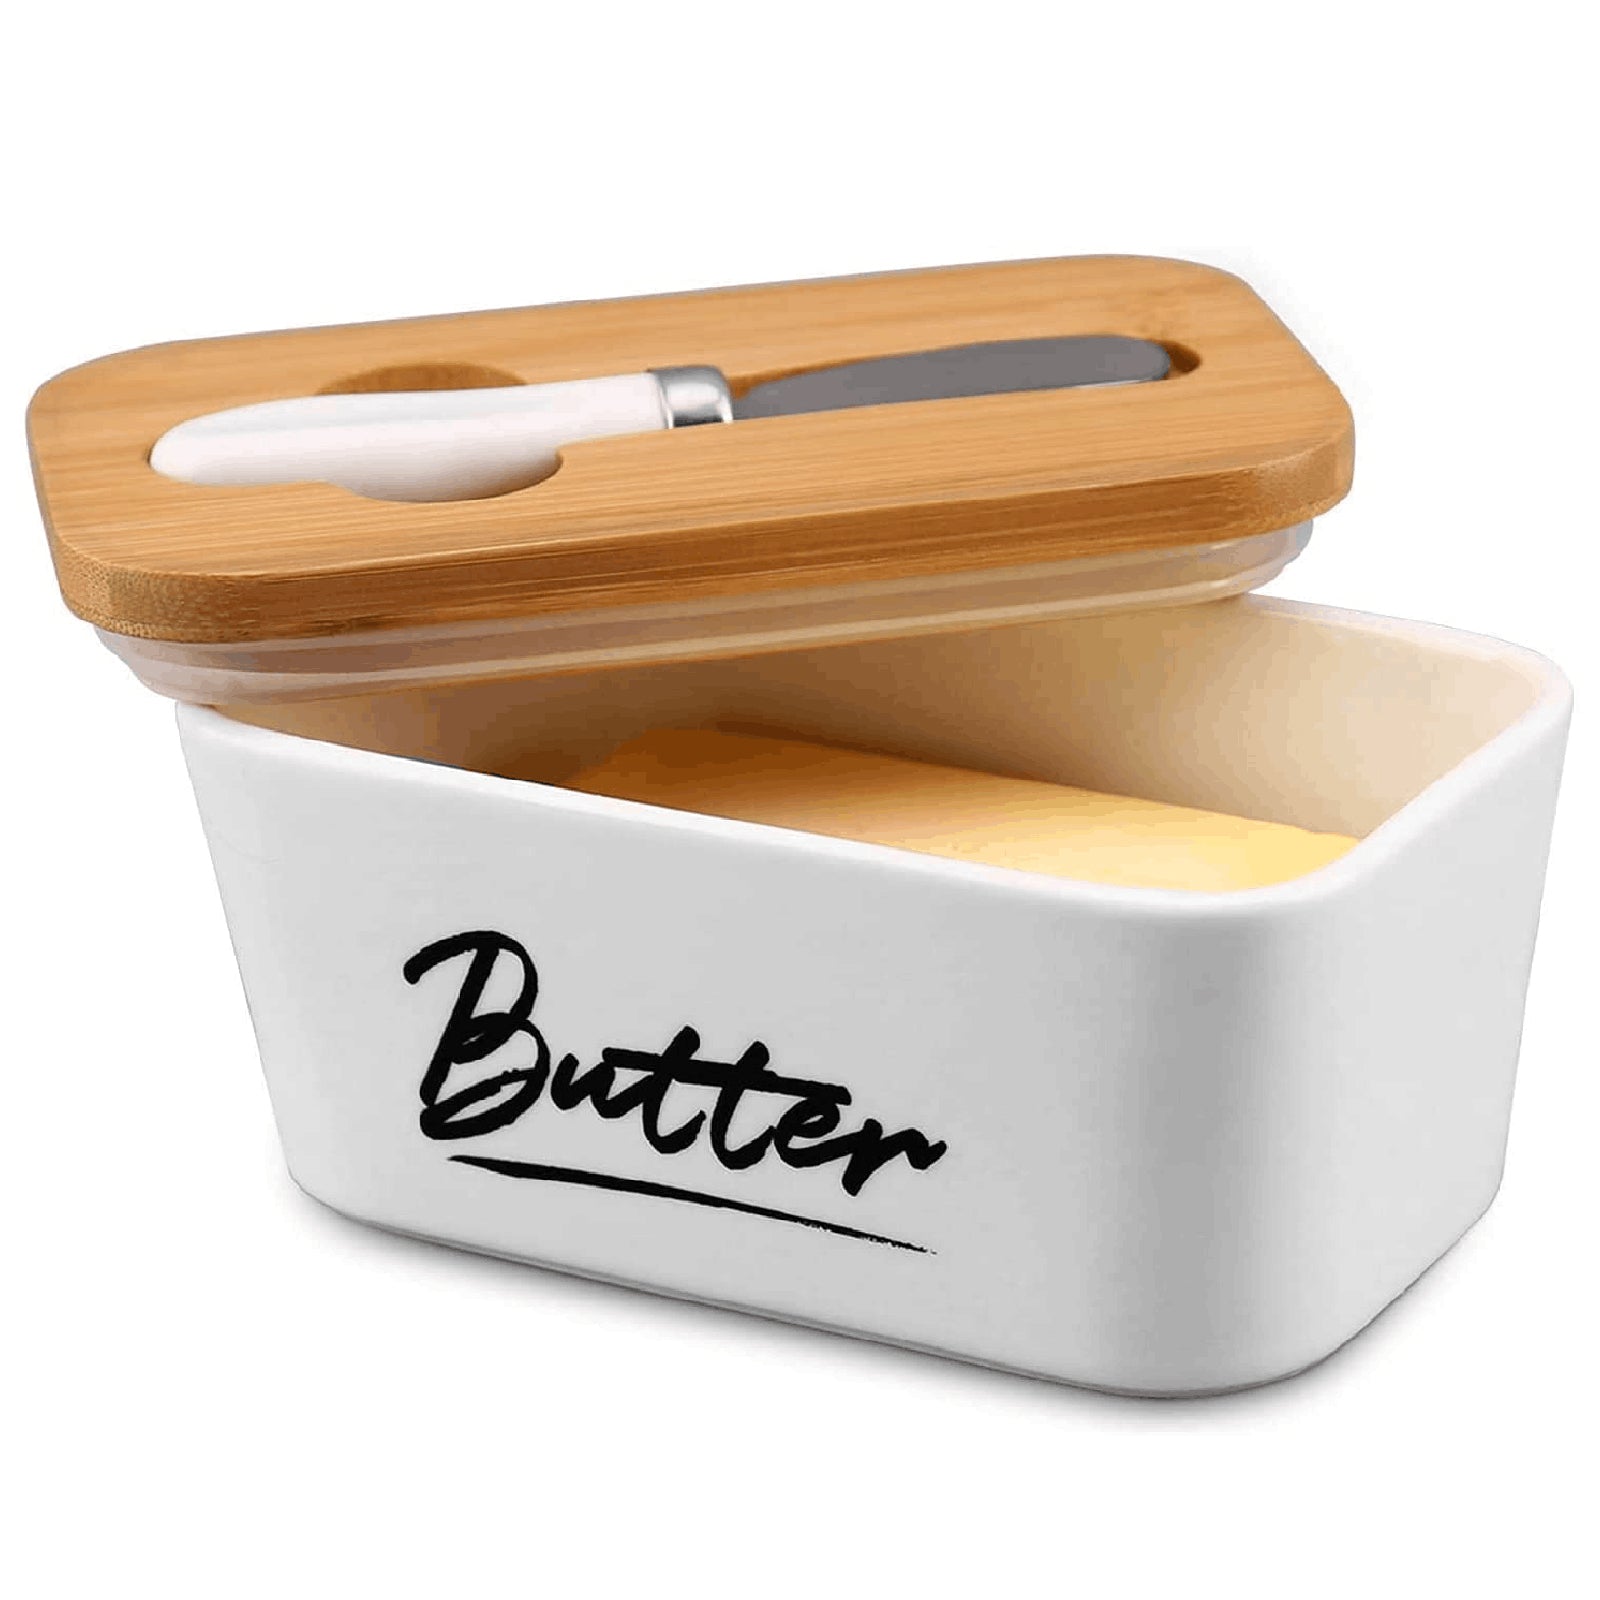 Ceramic Butter Dish with Bamboo Lid for Countertop,Large Butter